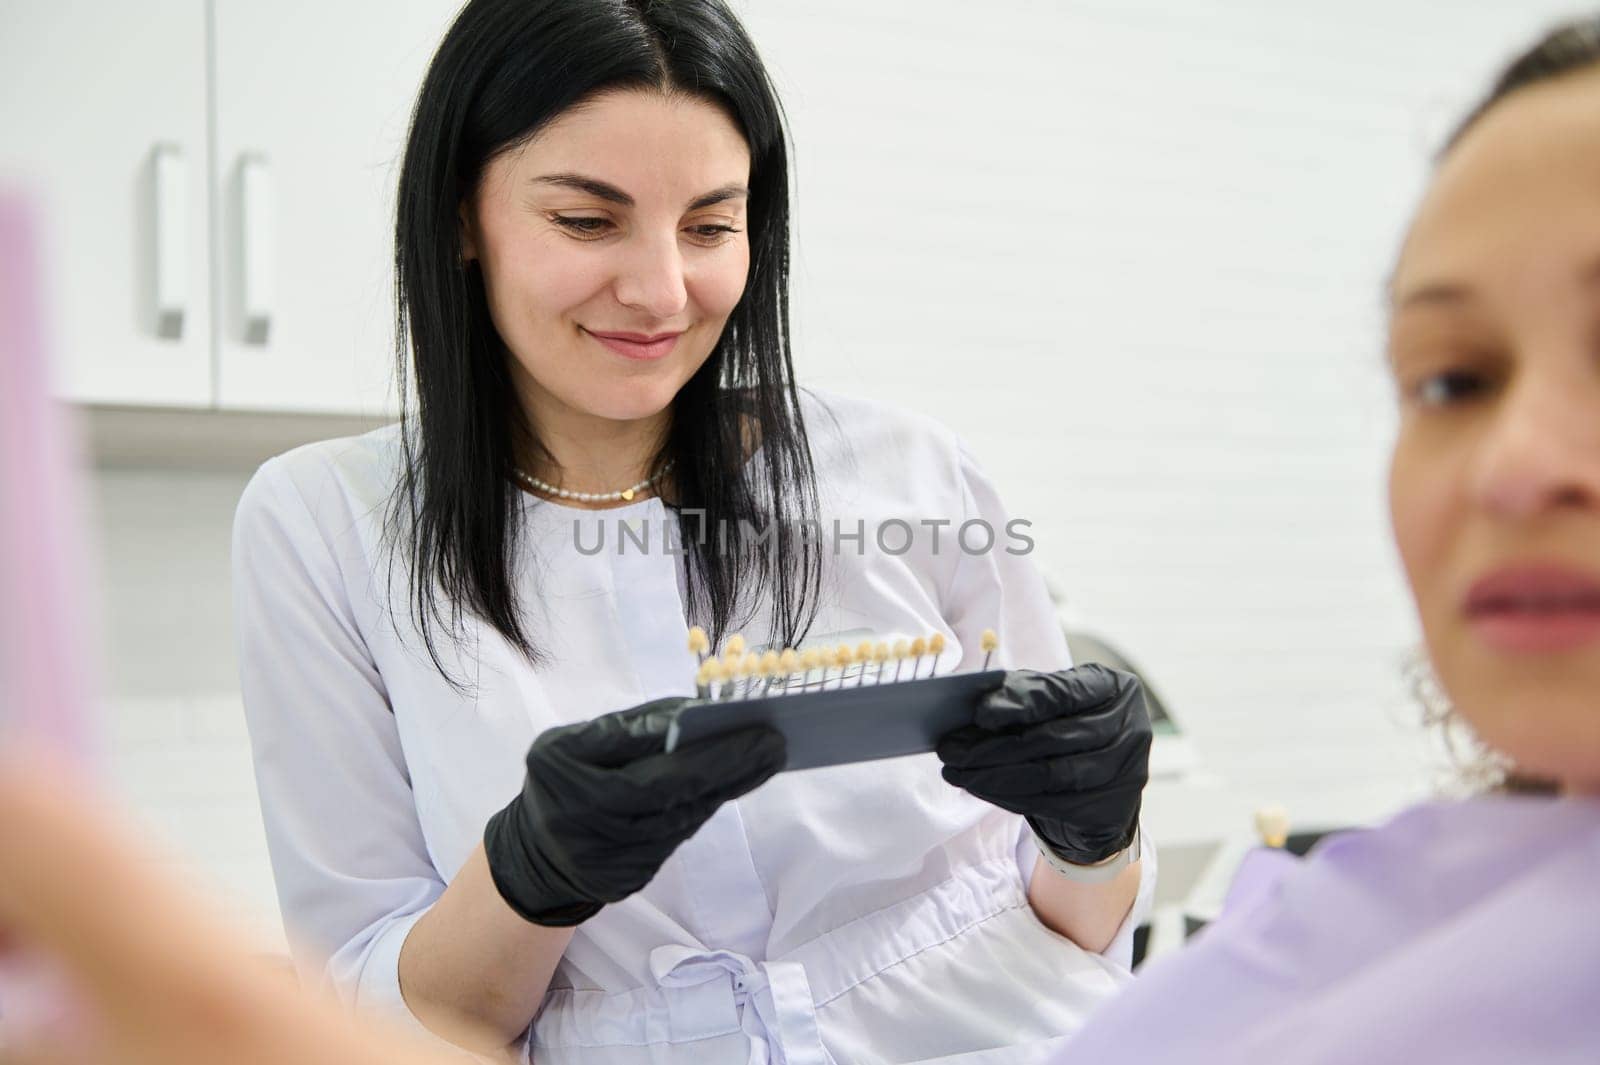 Smiling beautiful woman dentist orthodontist holding teeth color and shade chart guide according to Vita scale. Confident female doctor helping patient to choose shade for teeth bleaching procedure